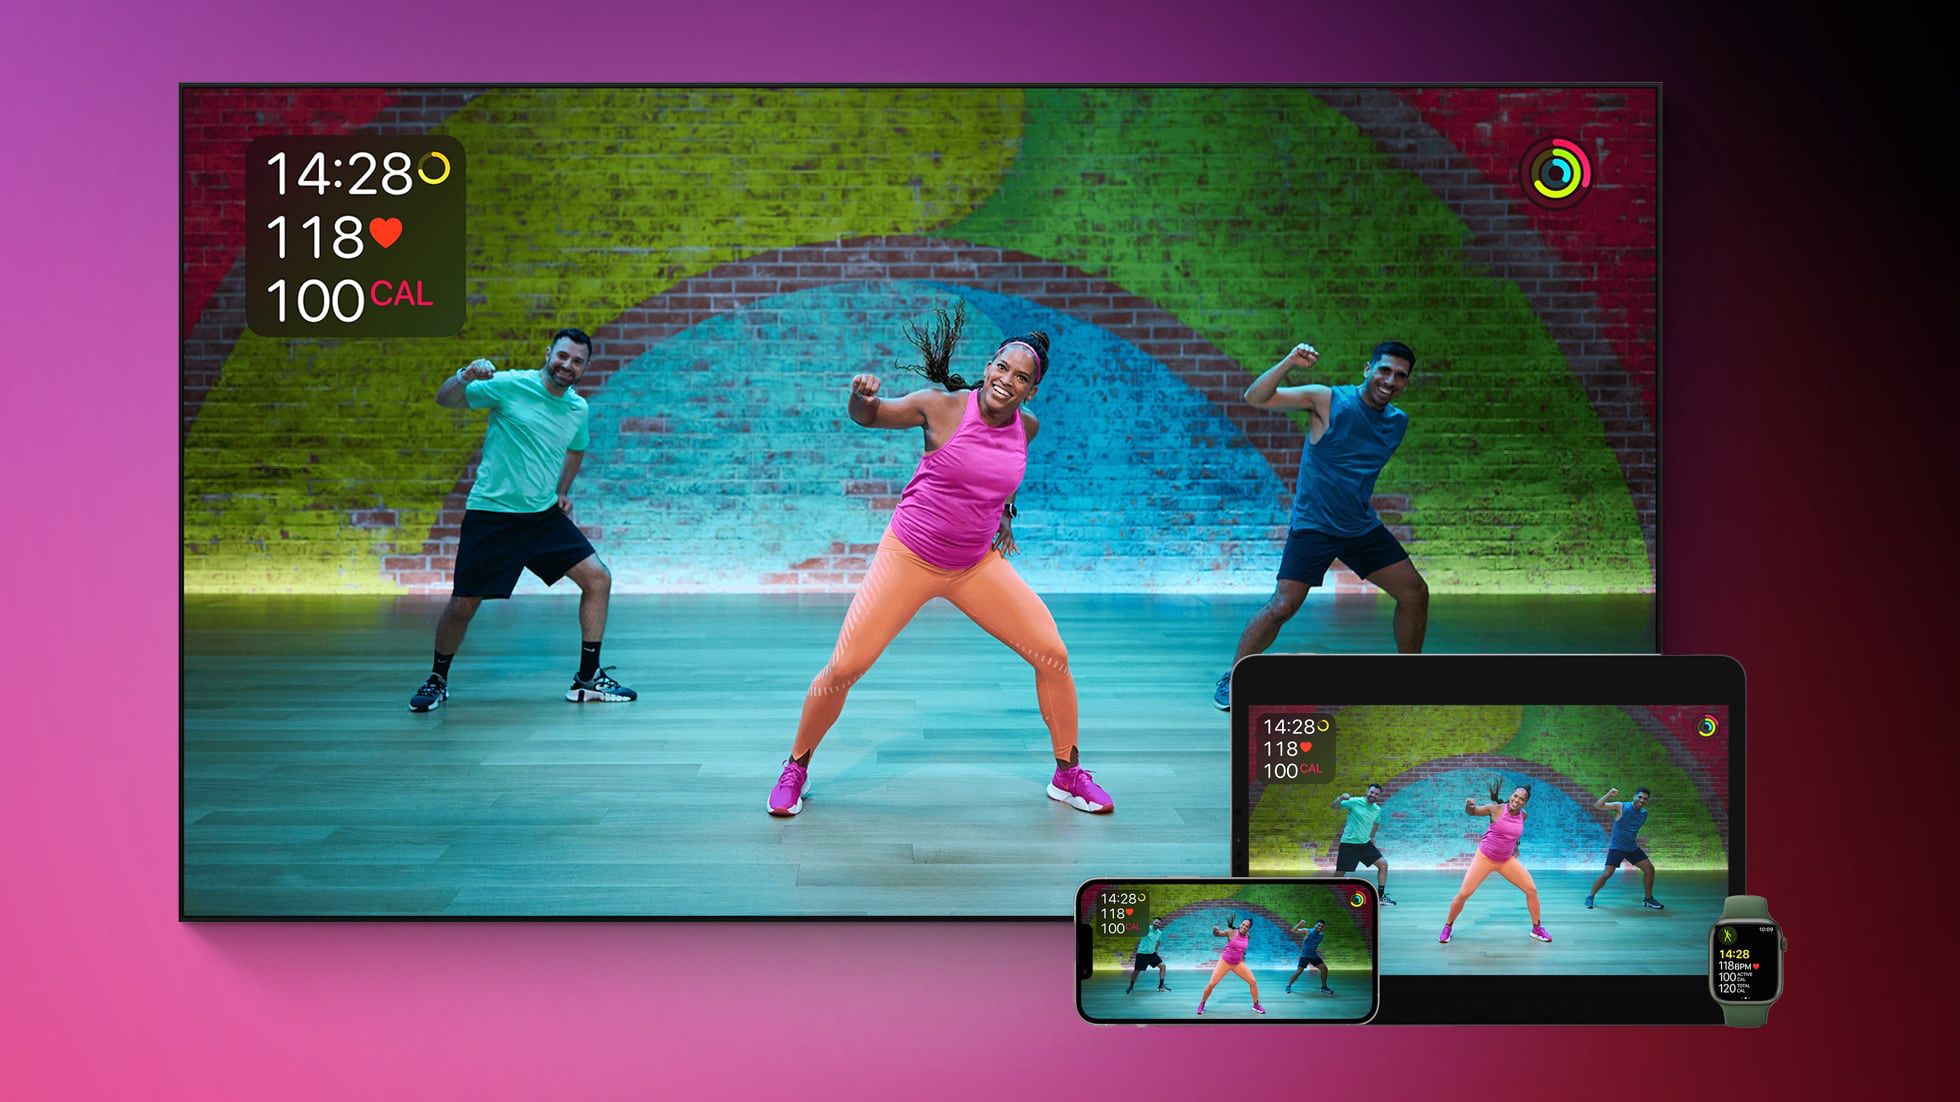 Apple Fitness + now offers over 4,000 exercise and meditation videos